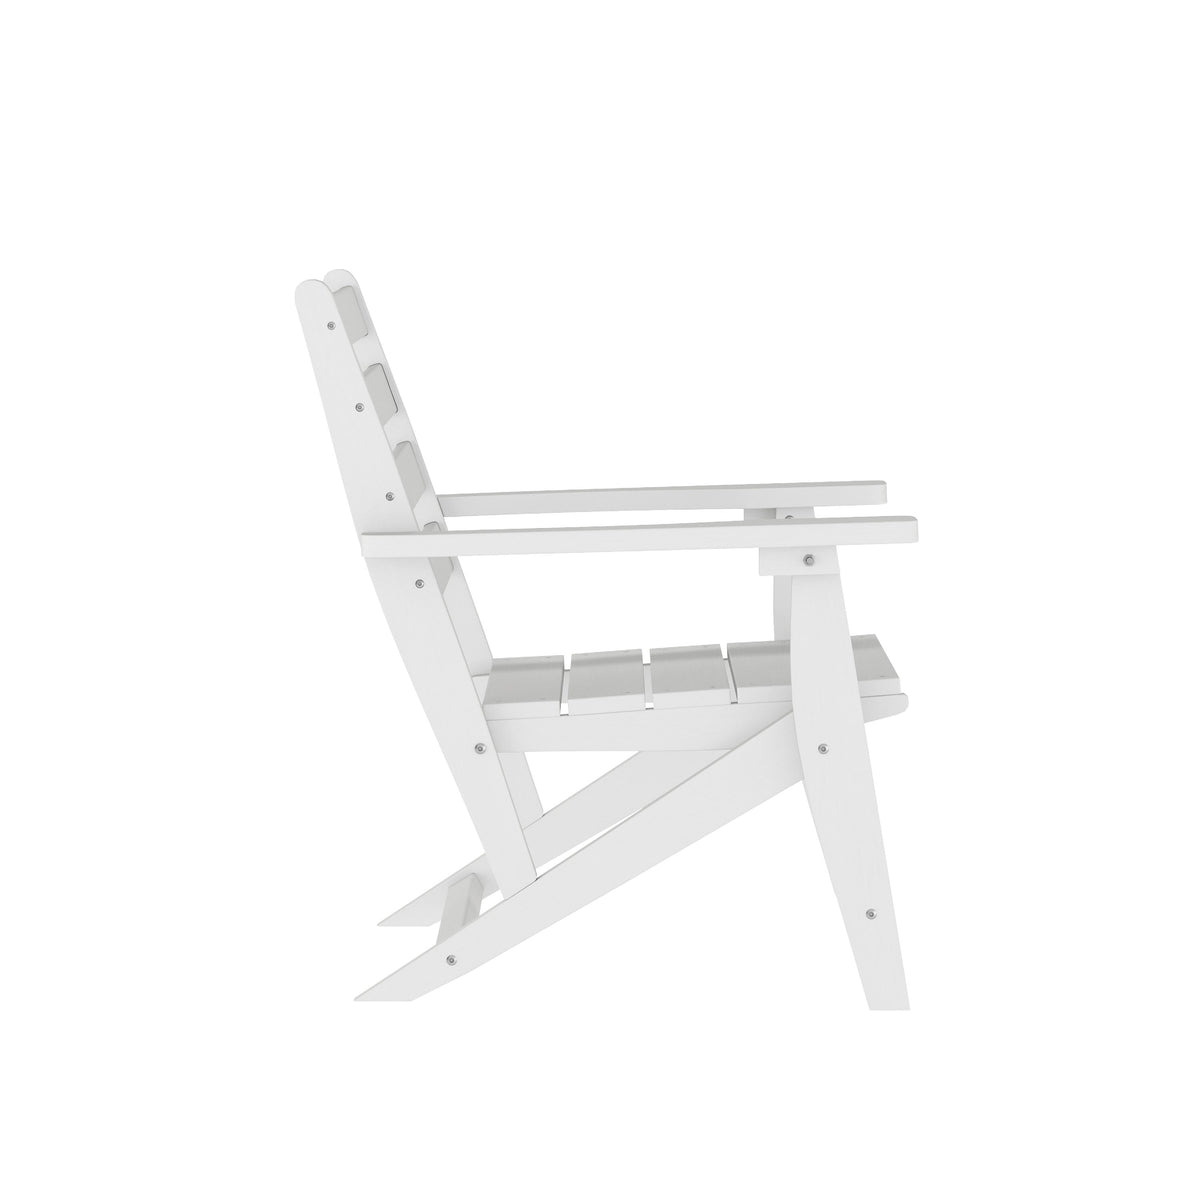 White |#| All-Weather Commercial Adirondack Dining Chair with Fold Out Cupholder - White